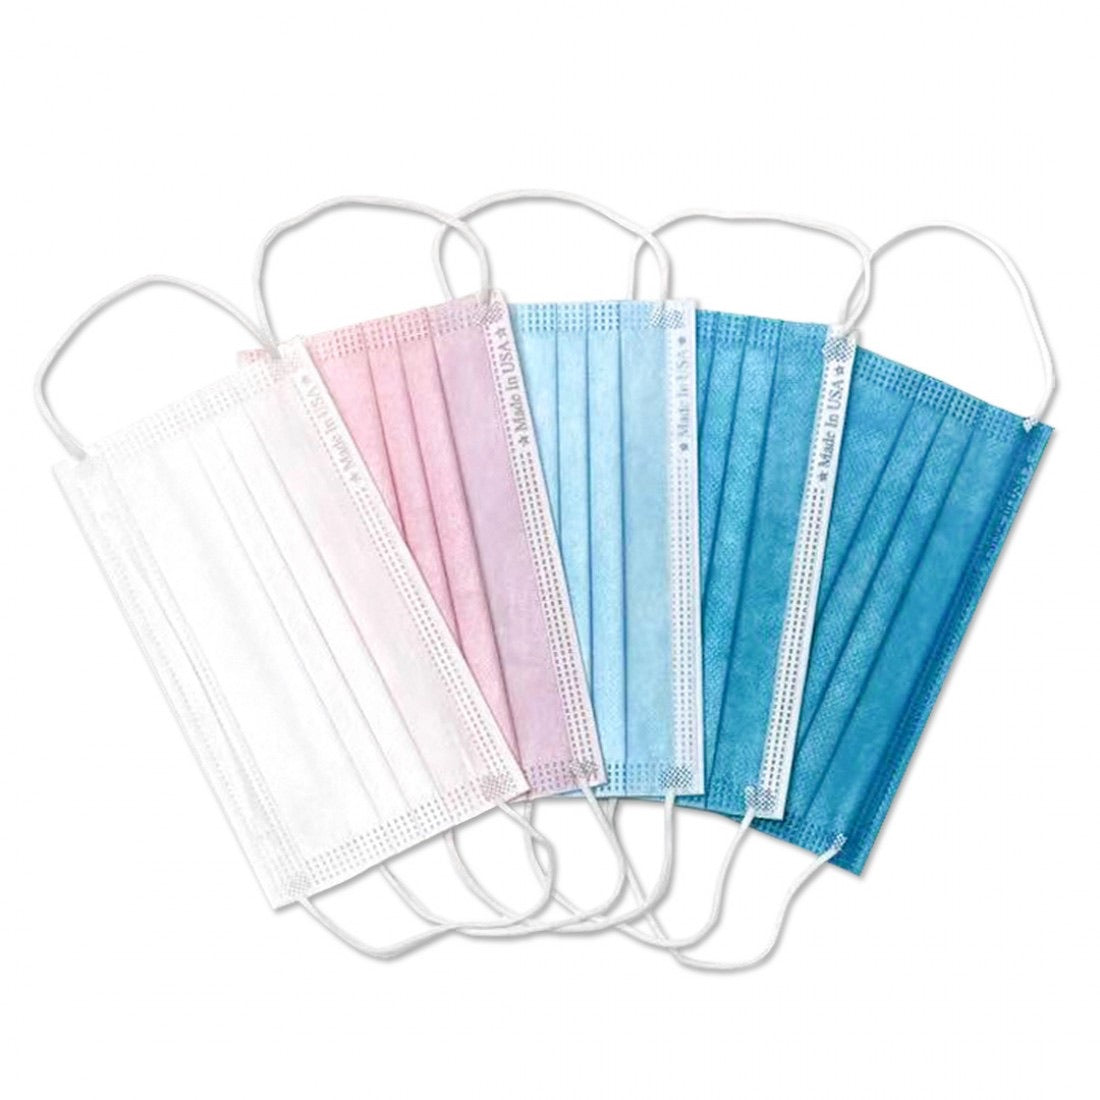 3-LAYER DISPOSABLE 5 MIXED COLOR FACE MASK MADE IN USA (20 PCS)-eSafety Supplies, Inc